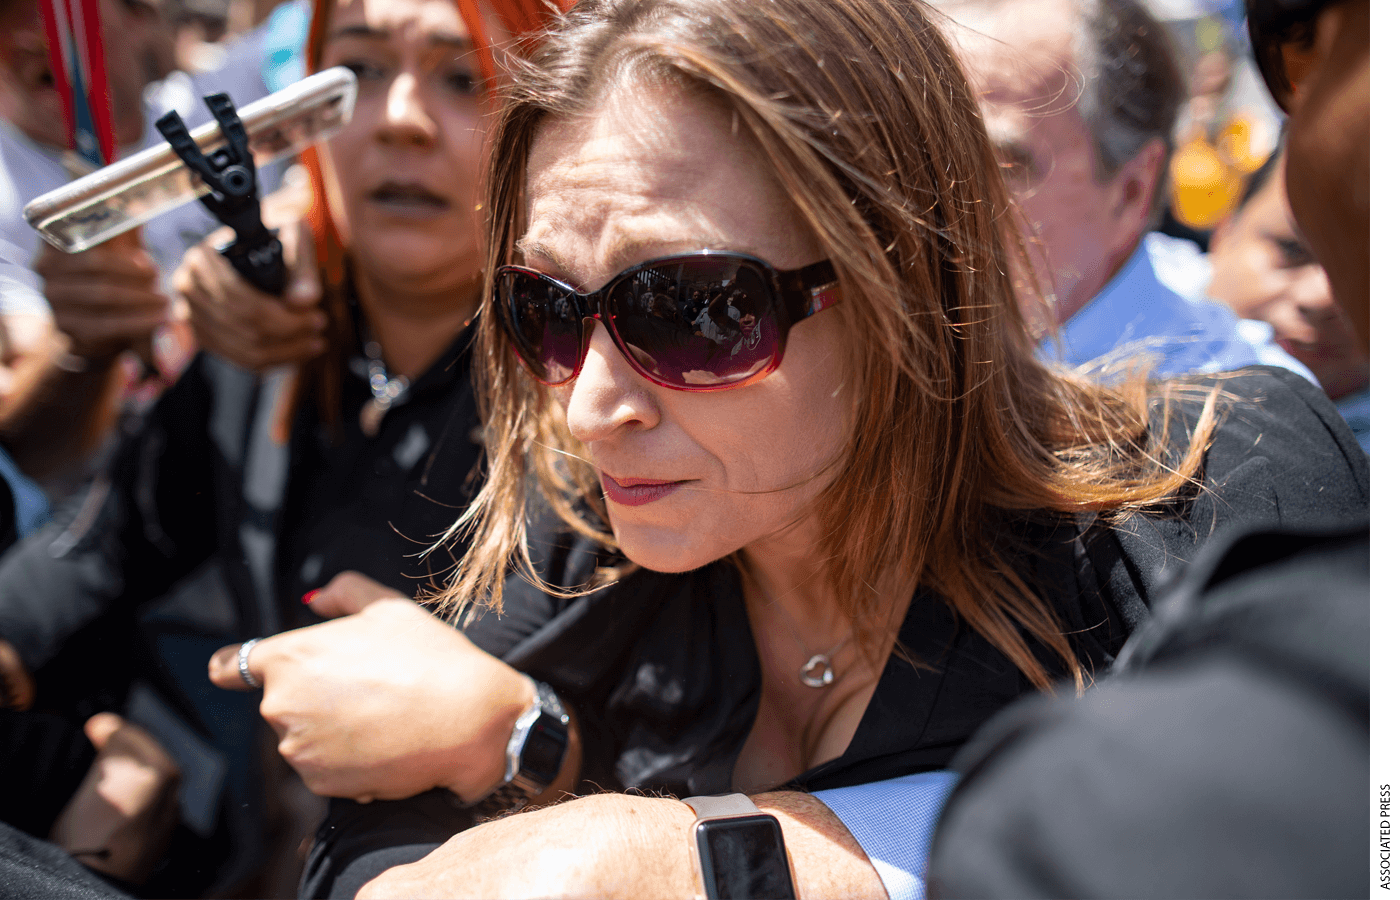 Julia Keleher, secretary of education of Puerto Rico, was sentenced to six months in federal prison after ushering in sweeping reforms, such as including breaking up the central education bureaucracy and introducing charter schools.